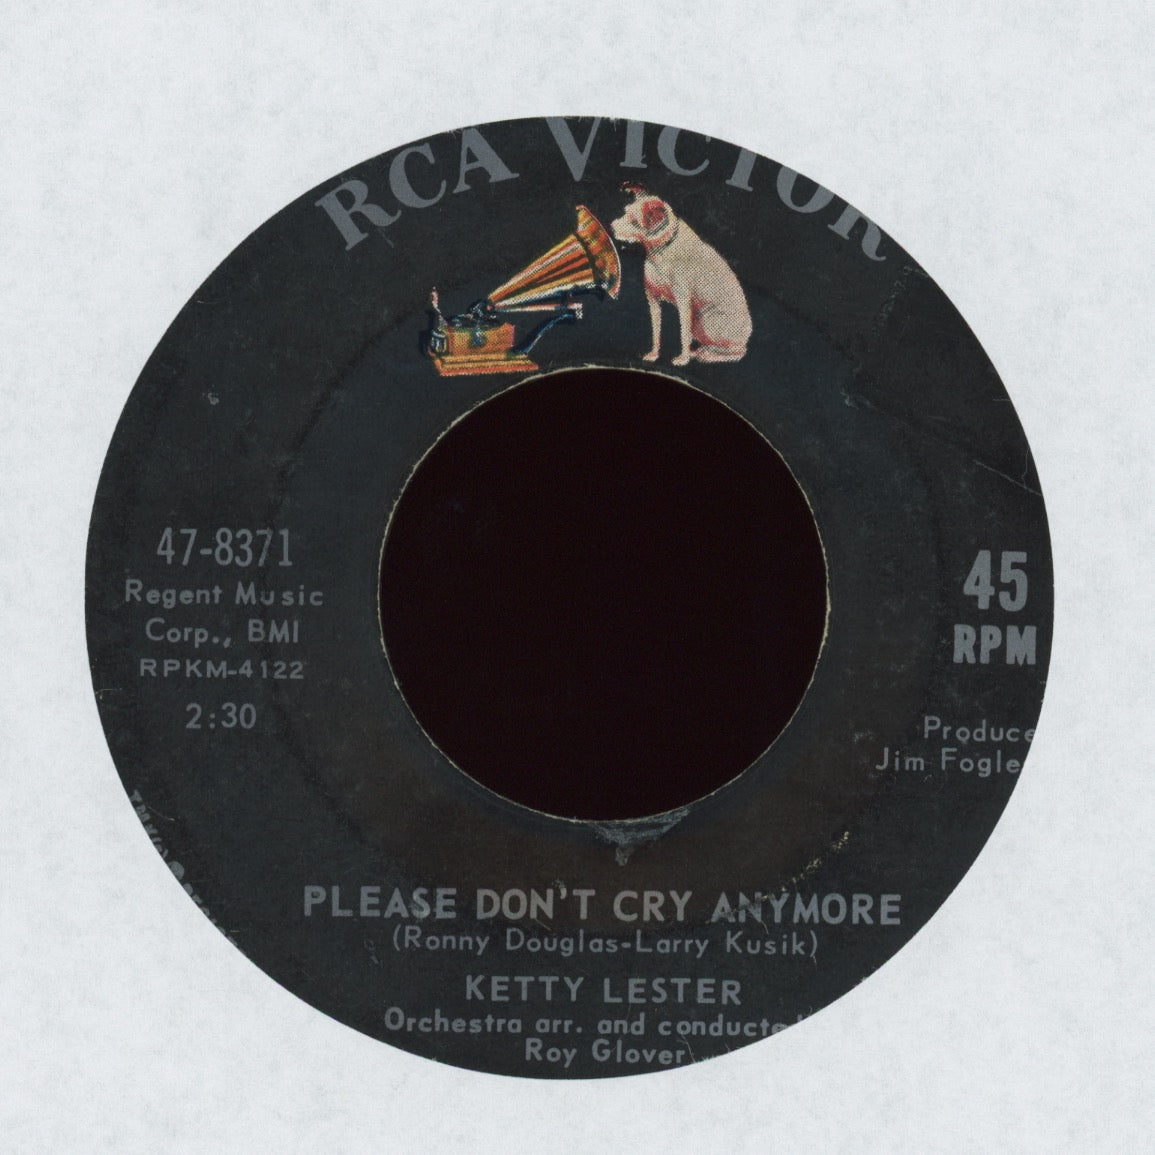 Ketty Lester - Please Don't Cry Anymore on RCA